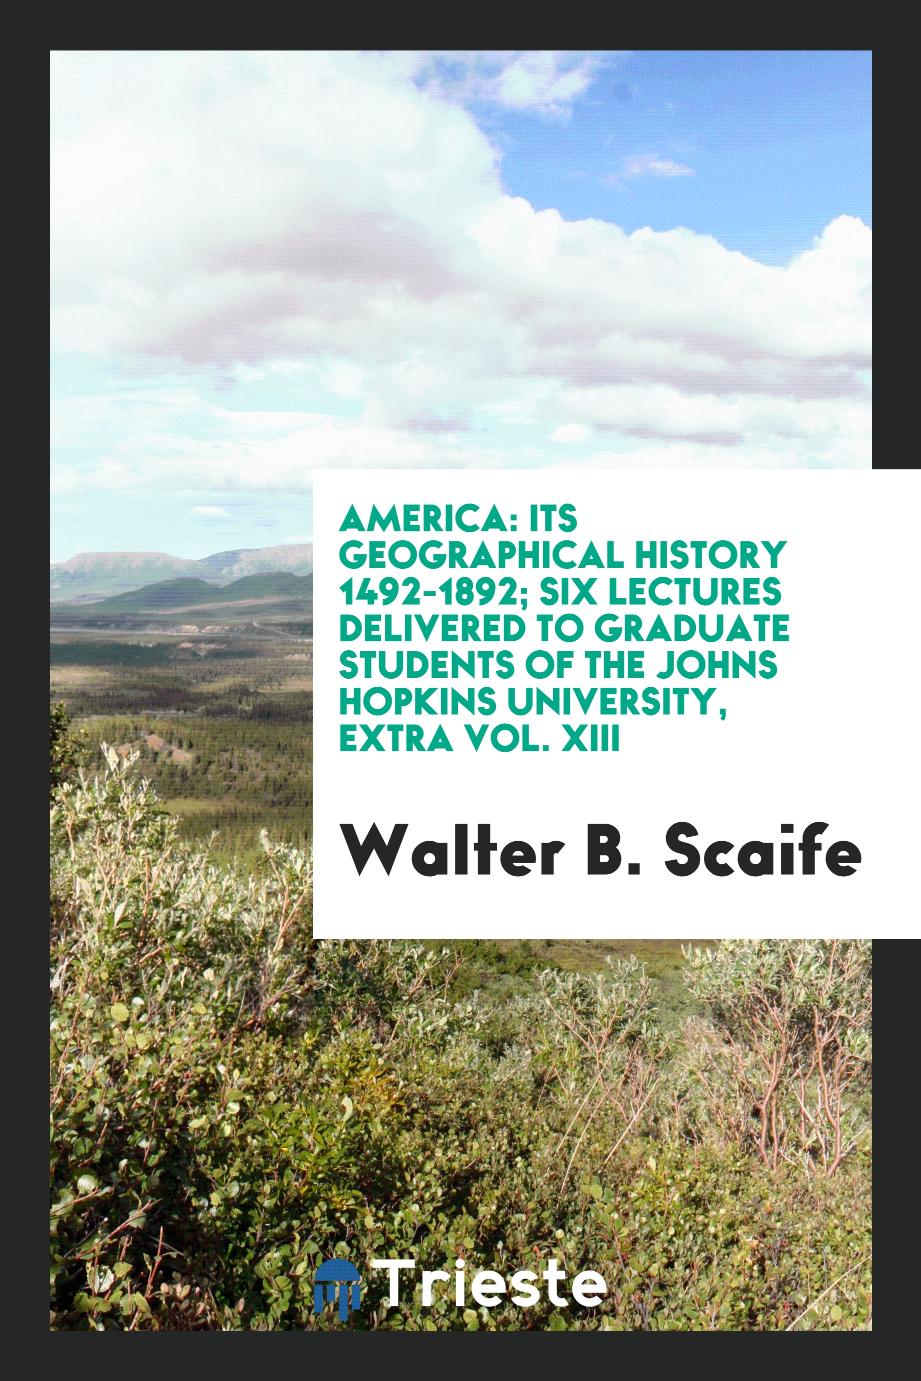 America: its geographical history 1492-1892; six lectures delivered to graduate students of the Johns Hopkins University, extra vol. XIII